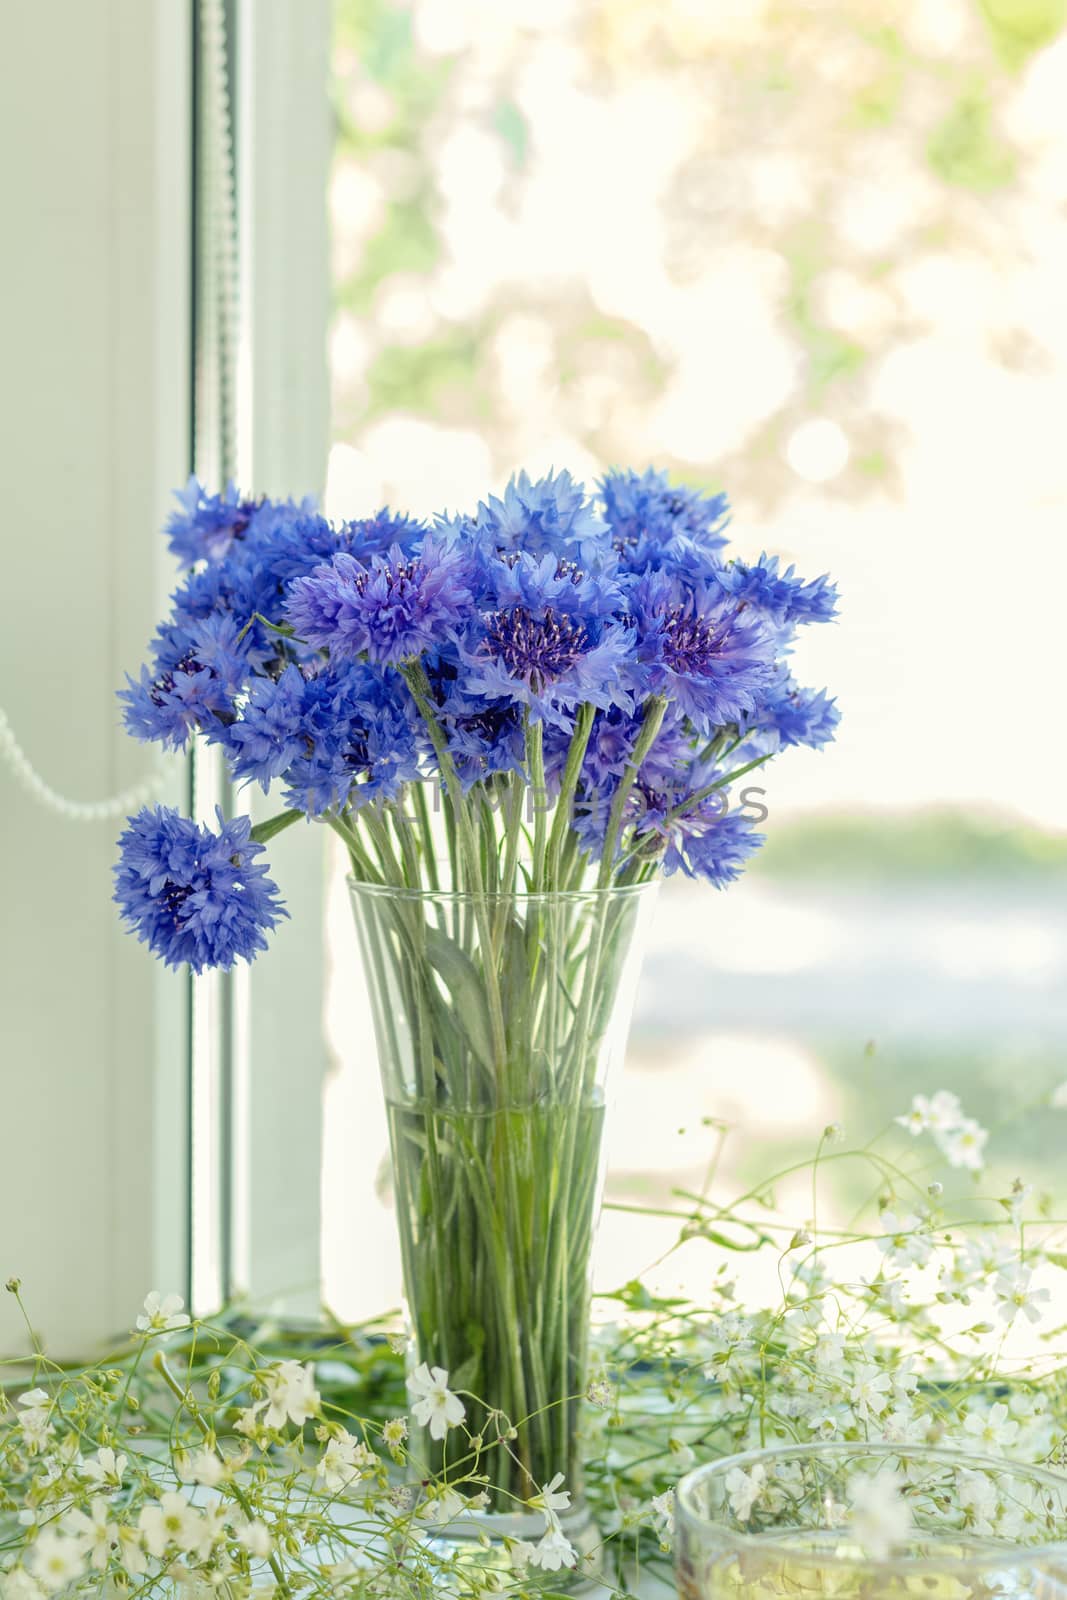 Cornflower flower in glass with white spring flowers on windowsill. Shallow depth of field.